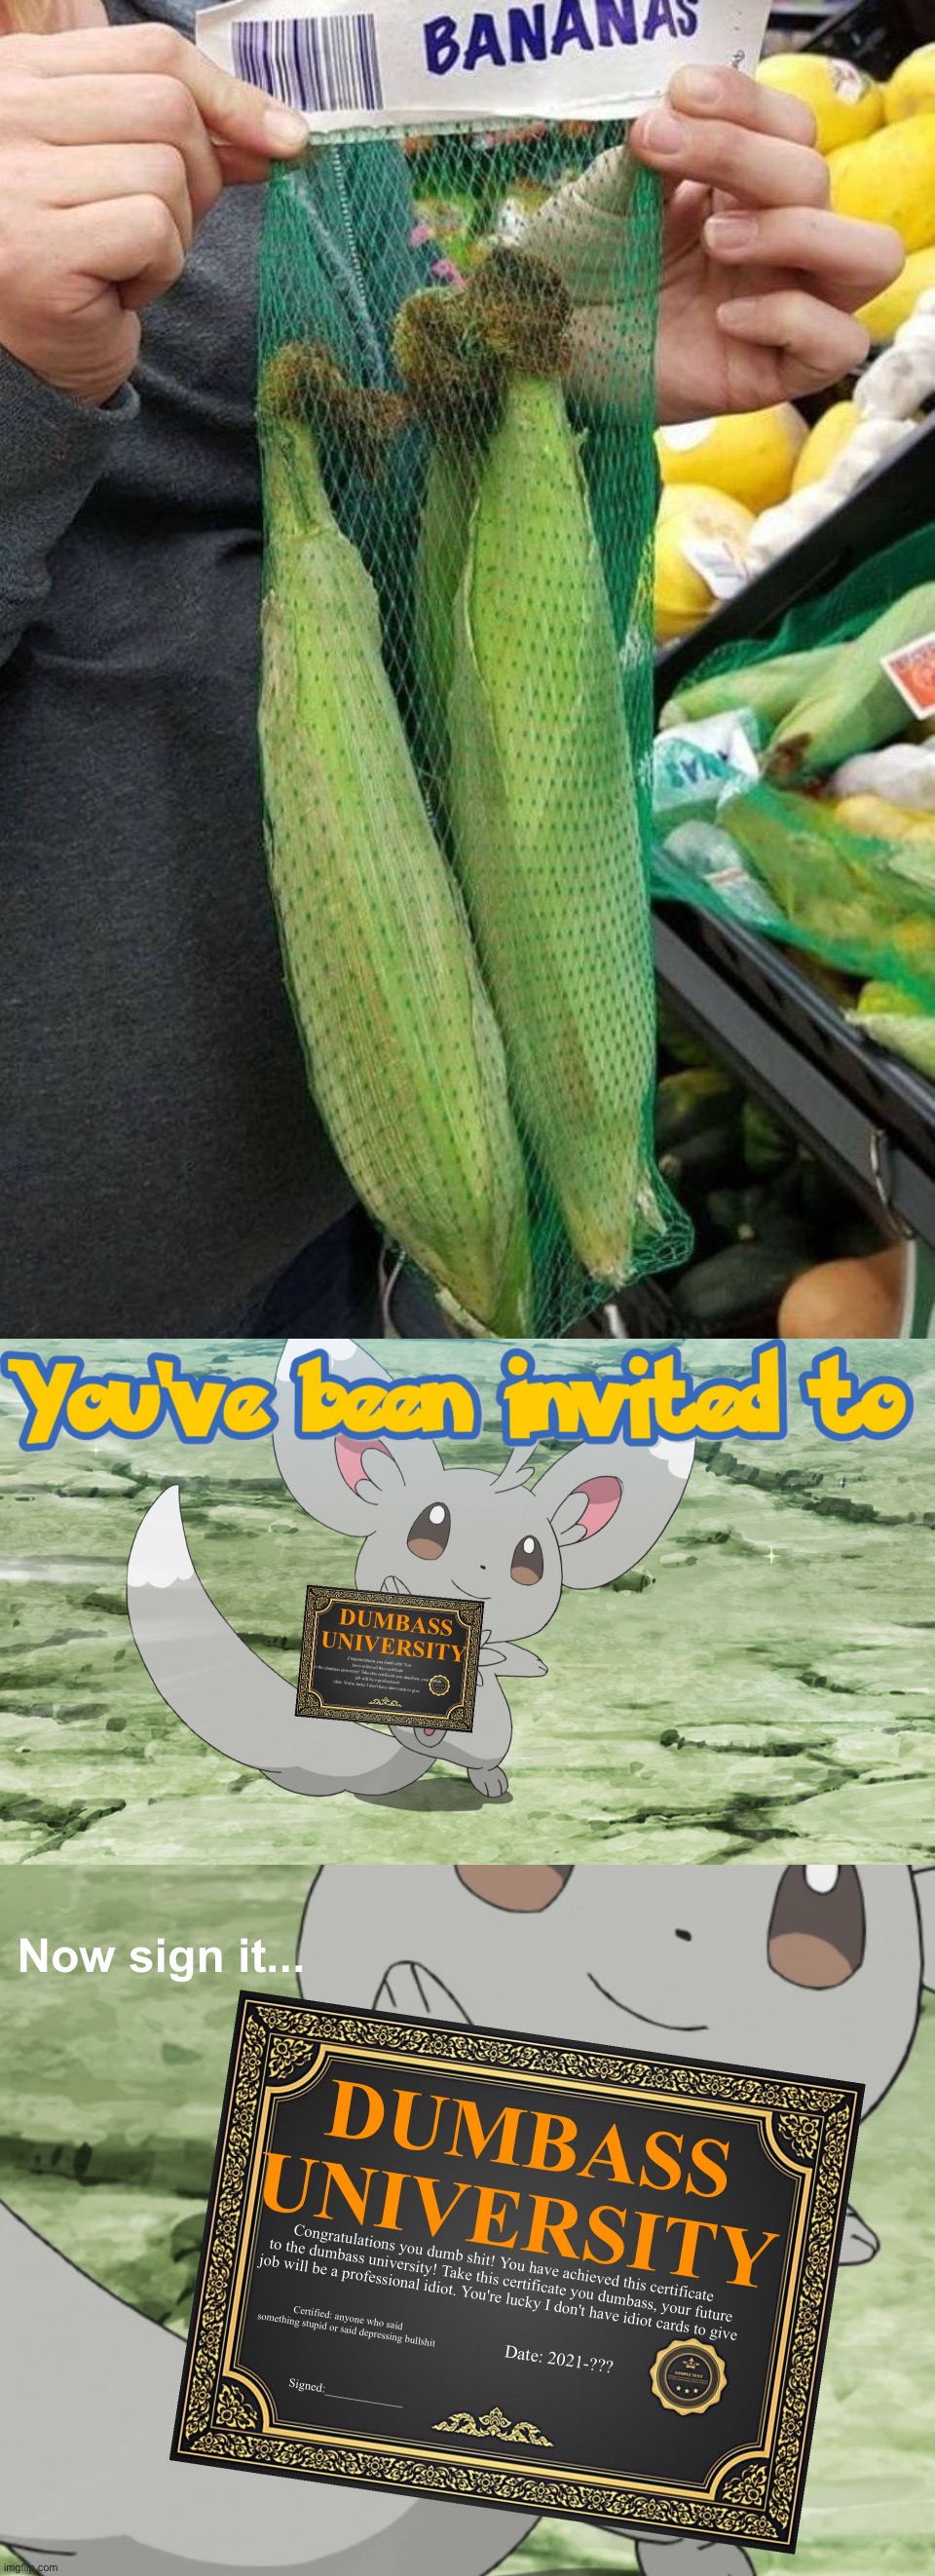 Wow, corn in a banana bag | image tagged in you've been invited to dumbass university,memes,funny,you had one job,and you failed,lmao | made w/ Imgflip meme maker